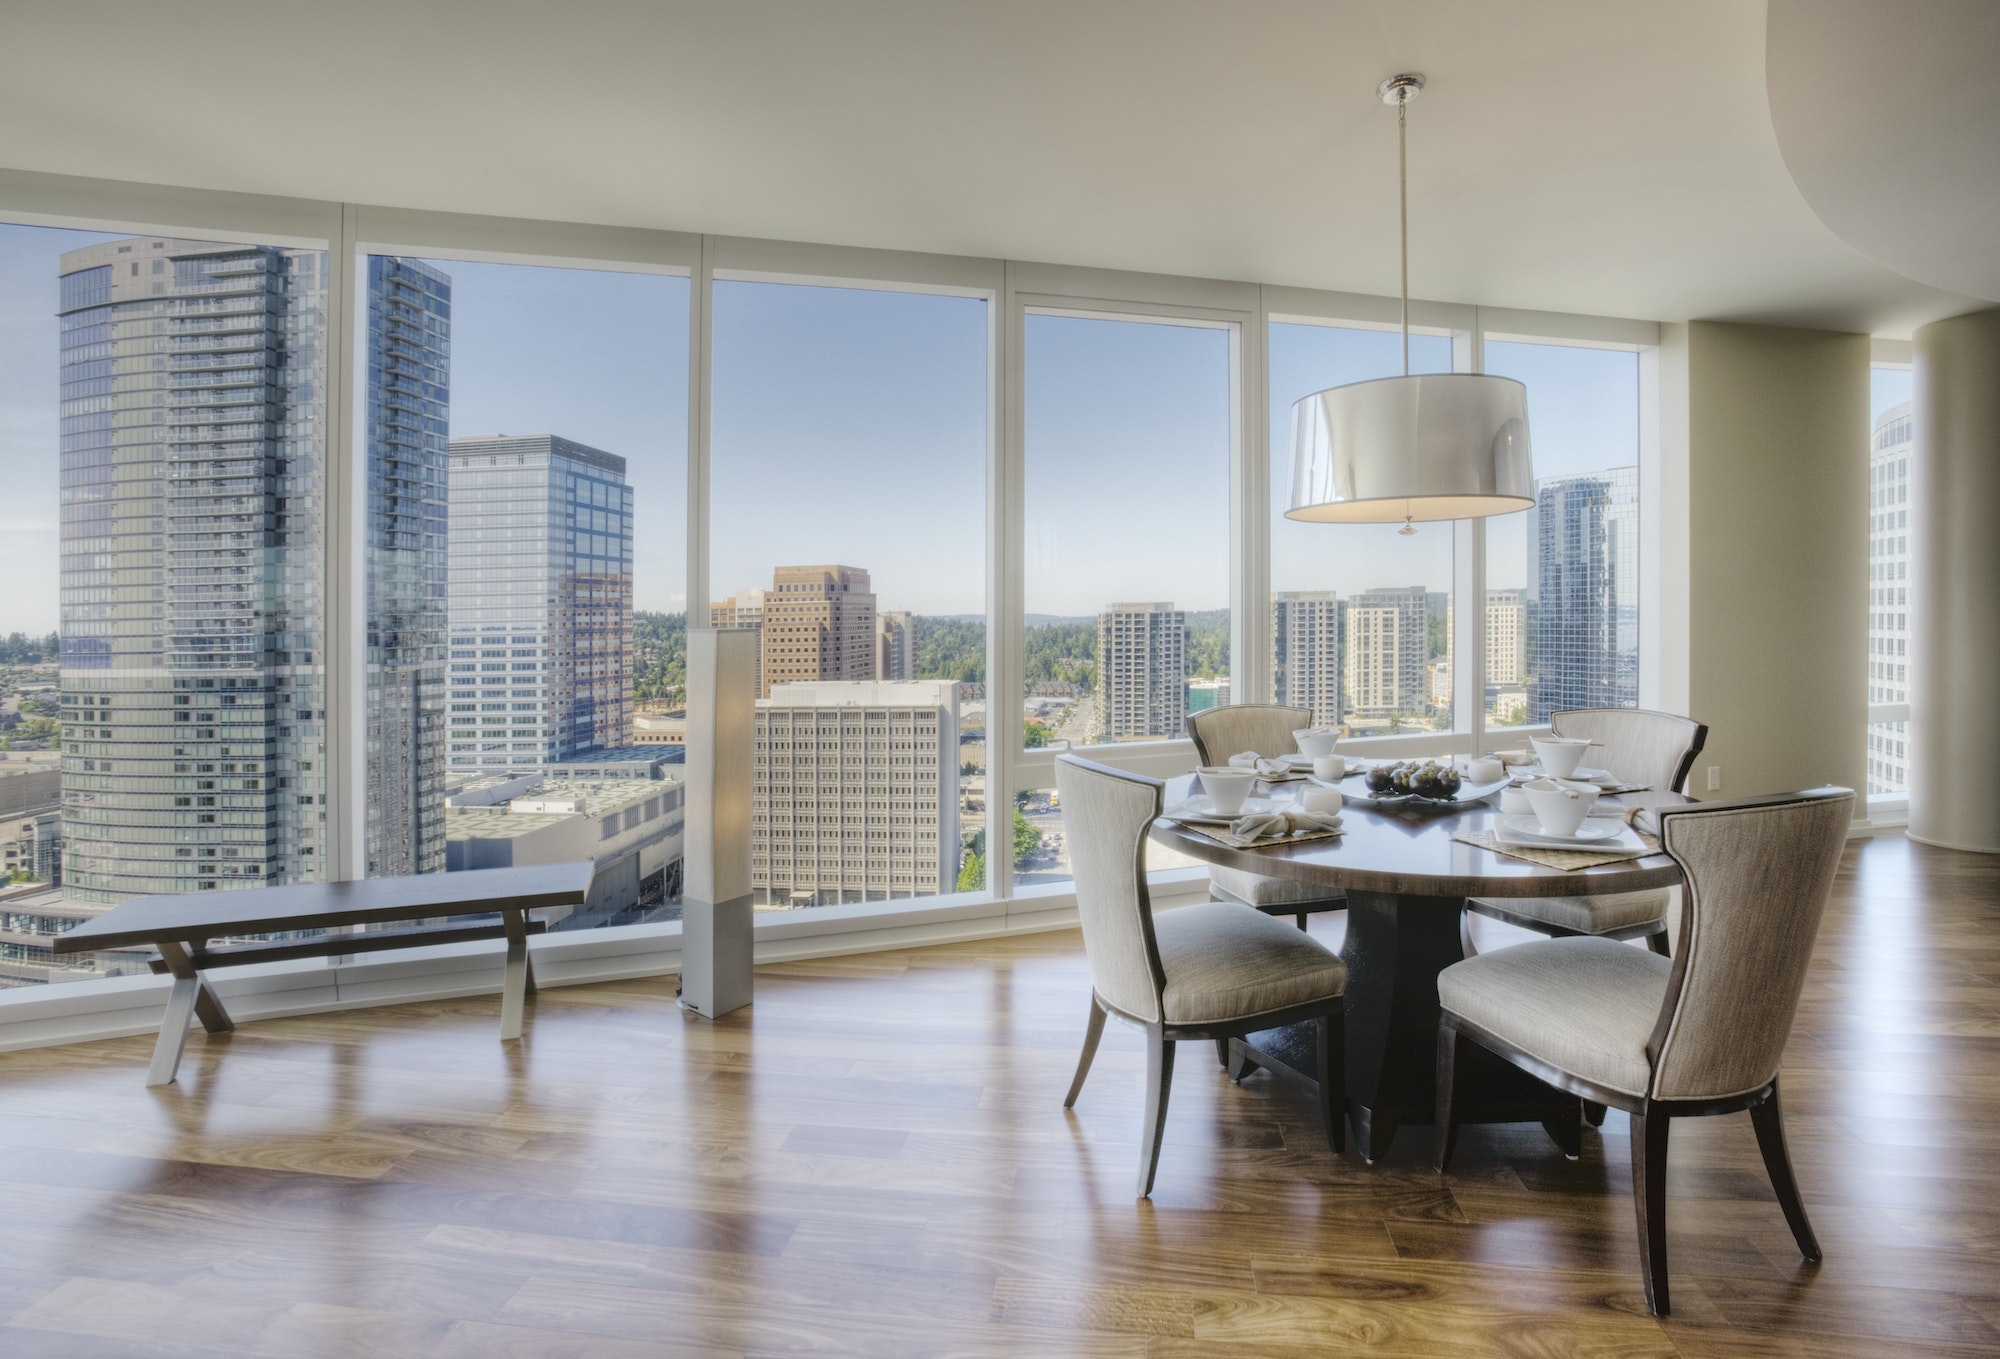 Dining room of luxury highrise apartment